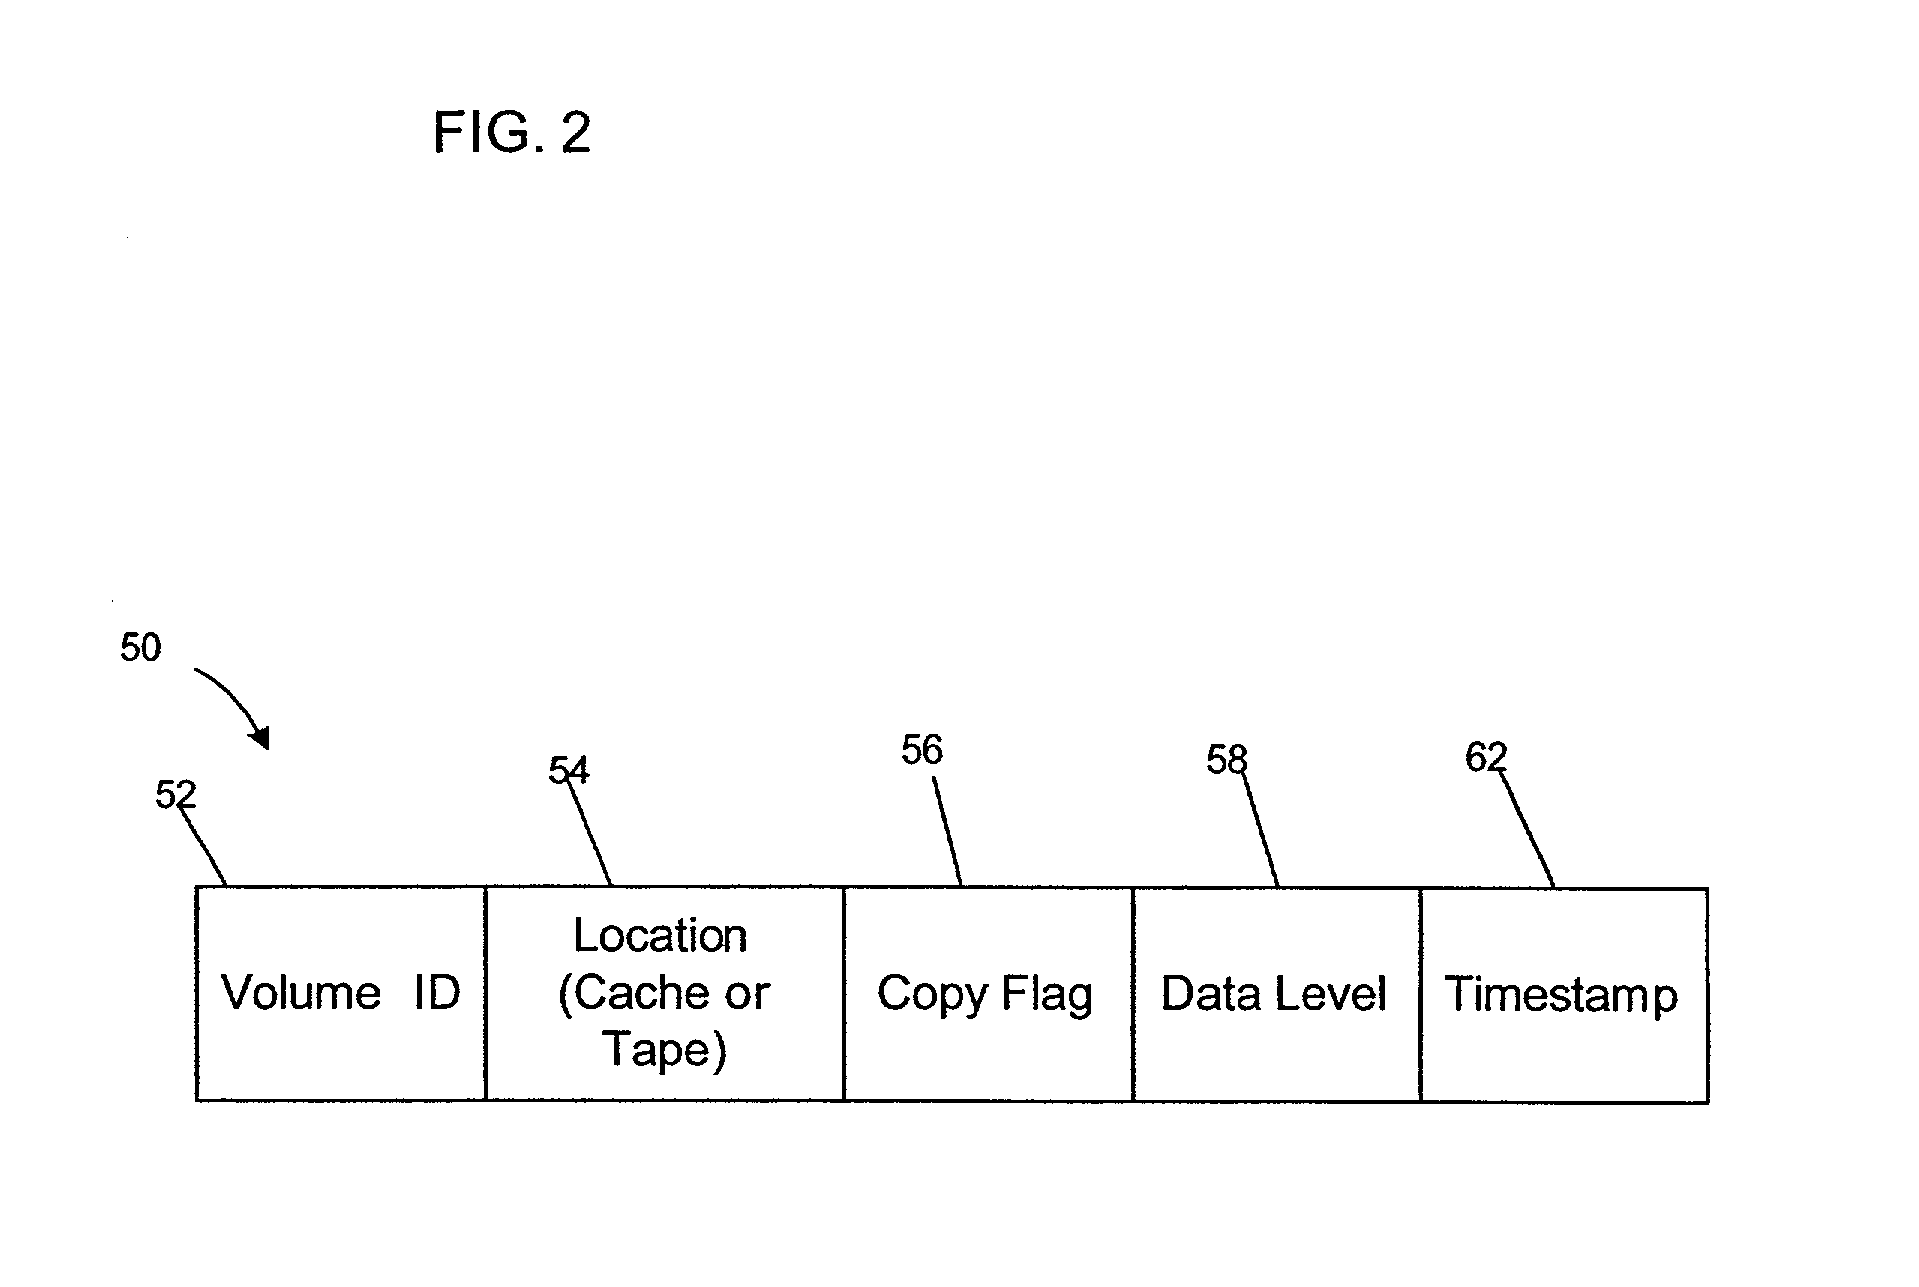 Preferential caching of uncopied logical volumes in a peer-to-peer virtual tape server